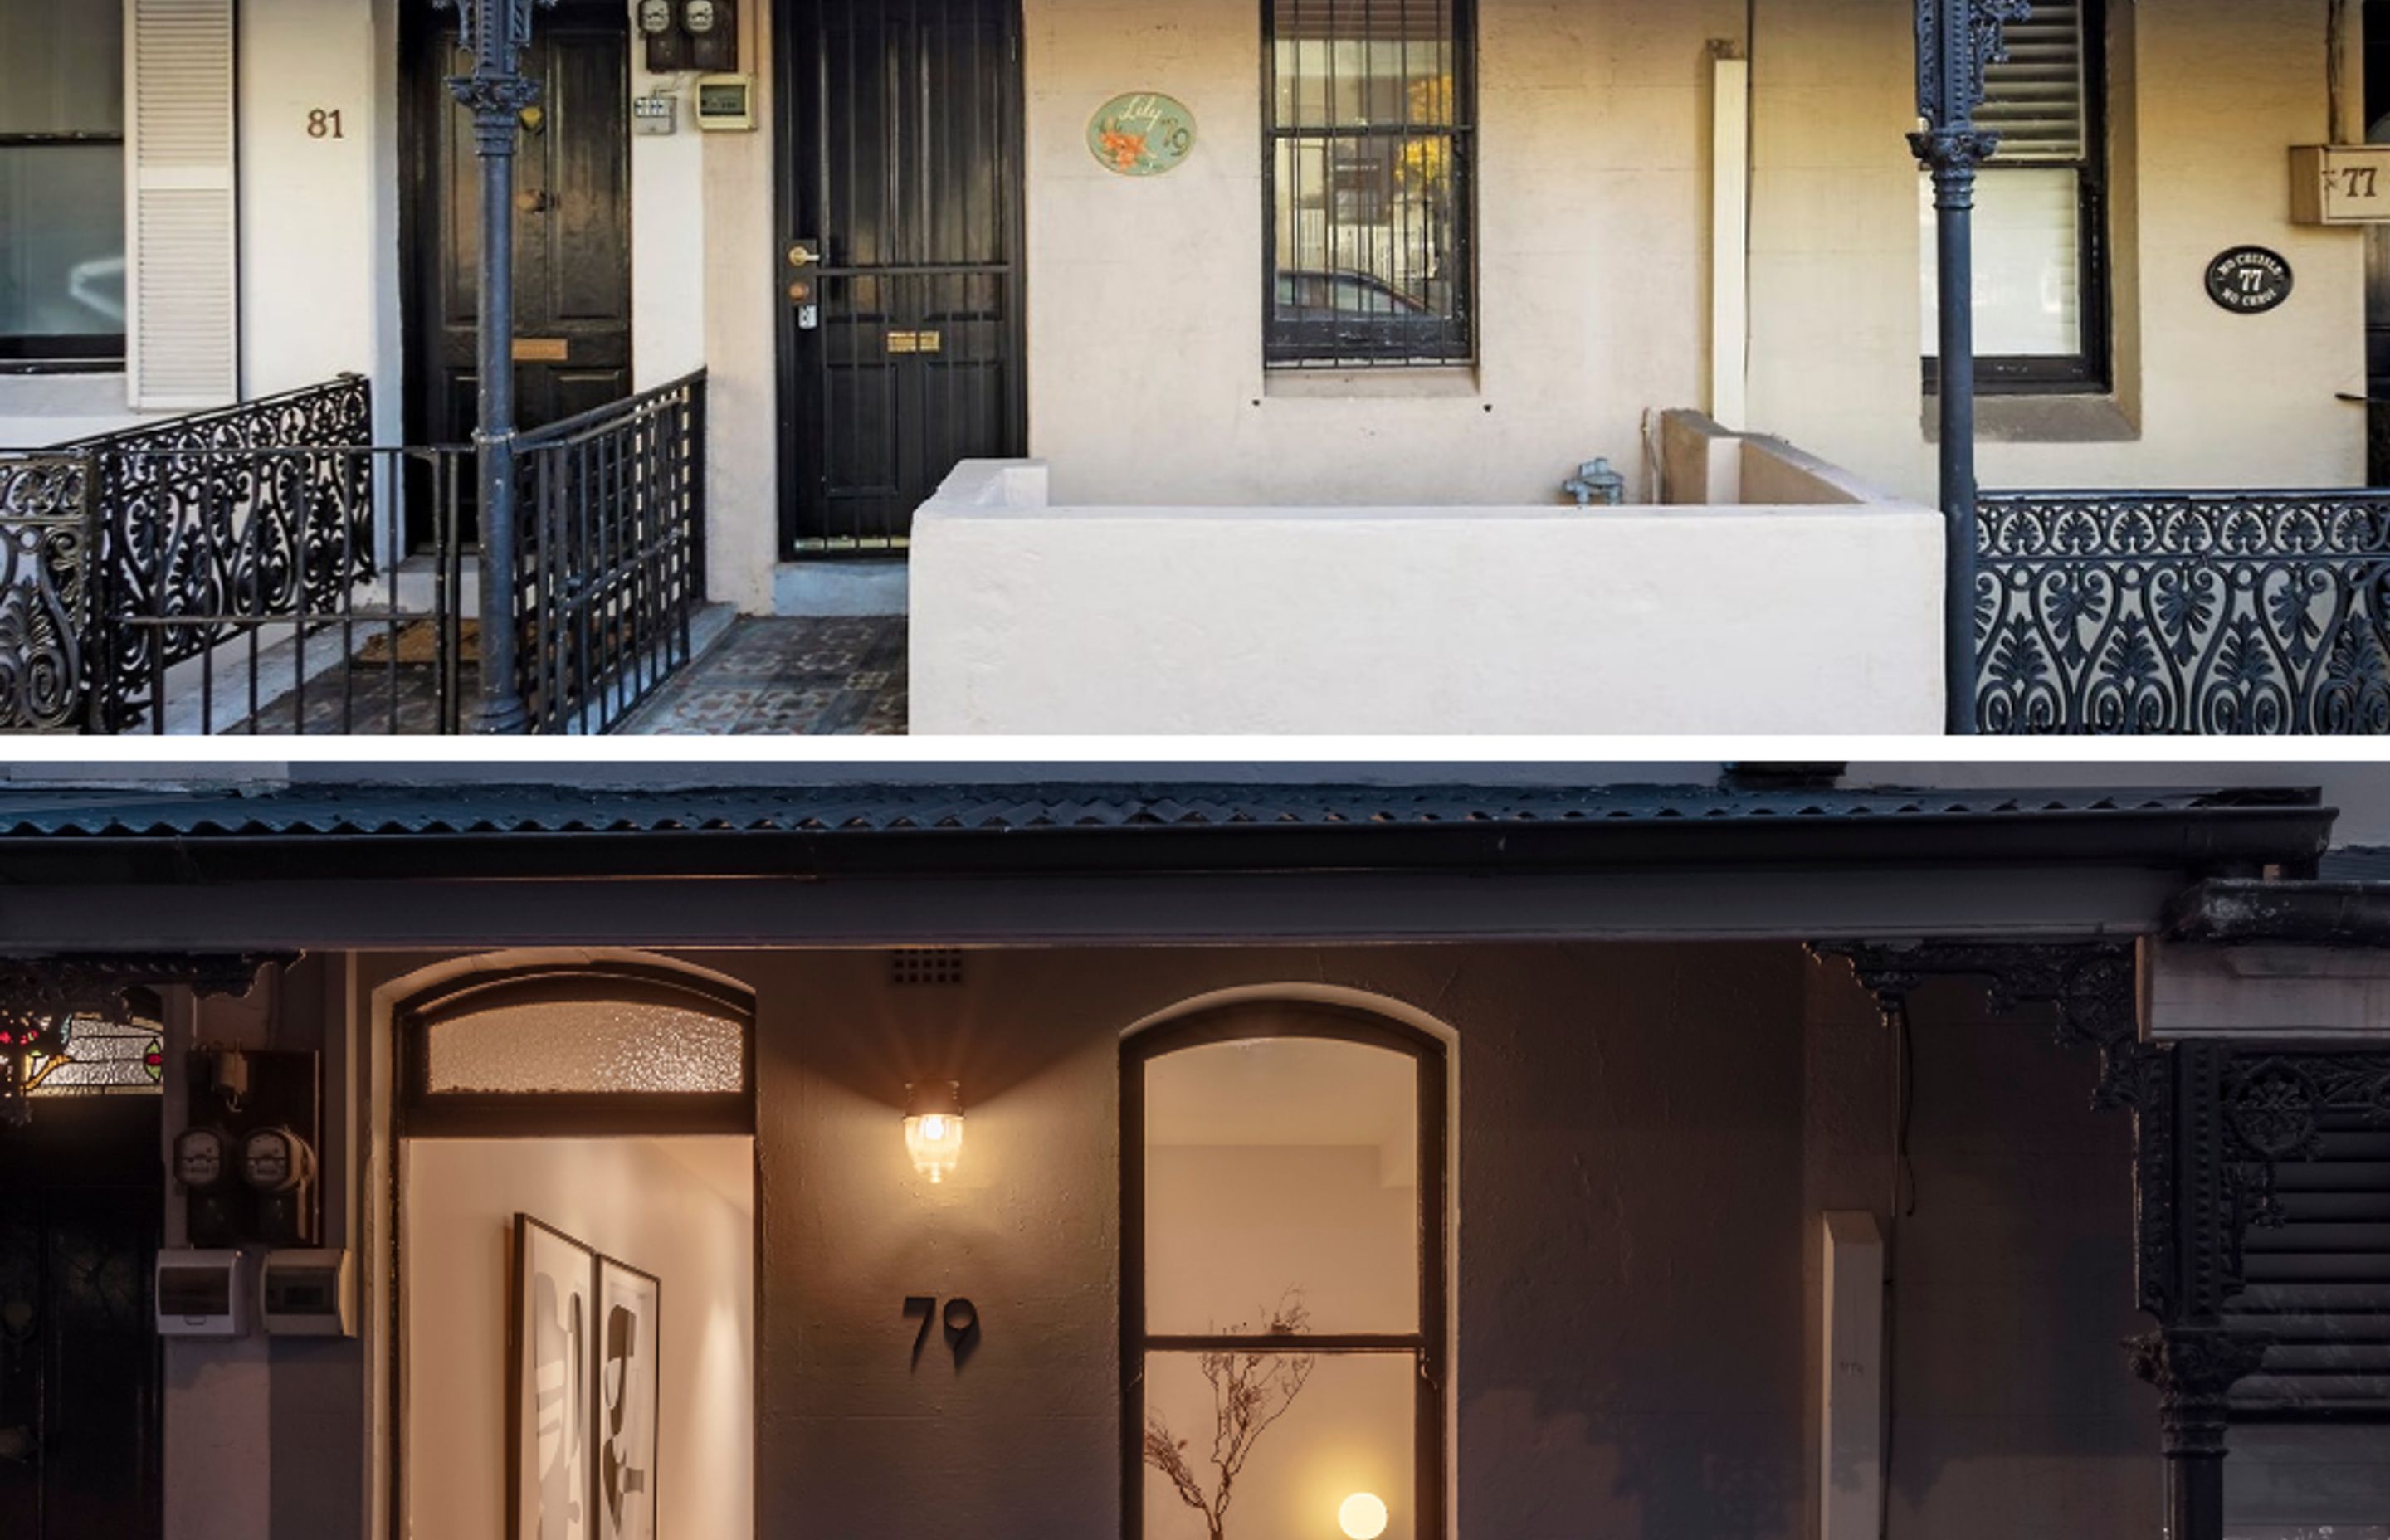 The exterior of the home before and after the renovation. After image: Murray Fredericks